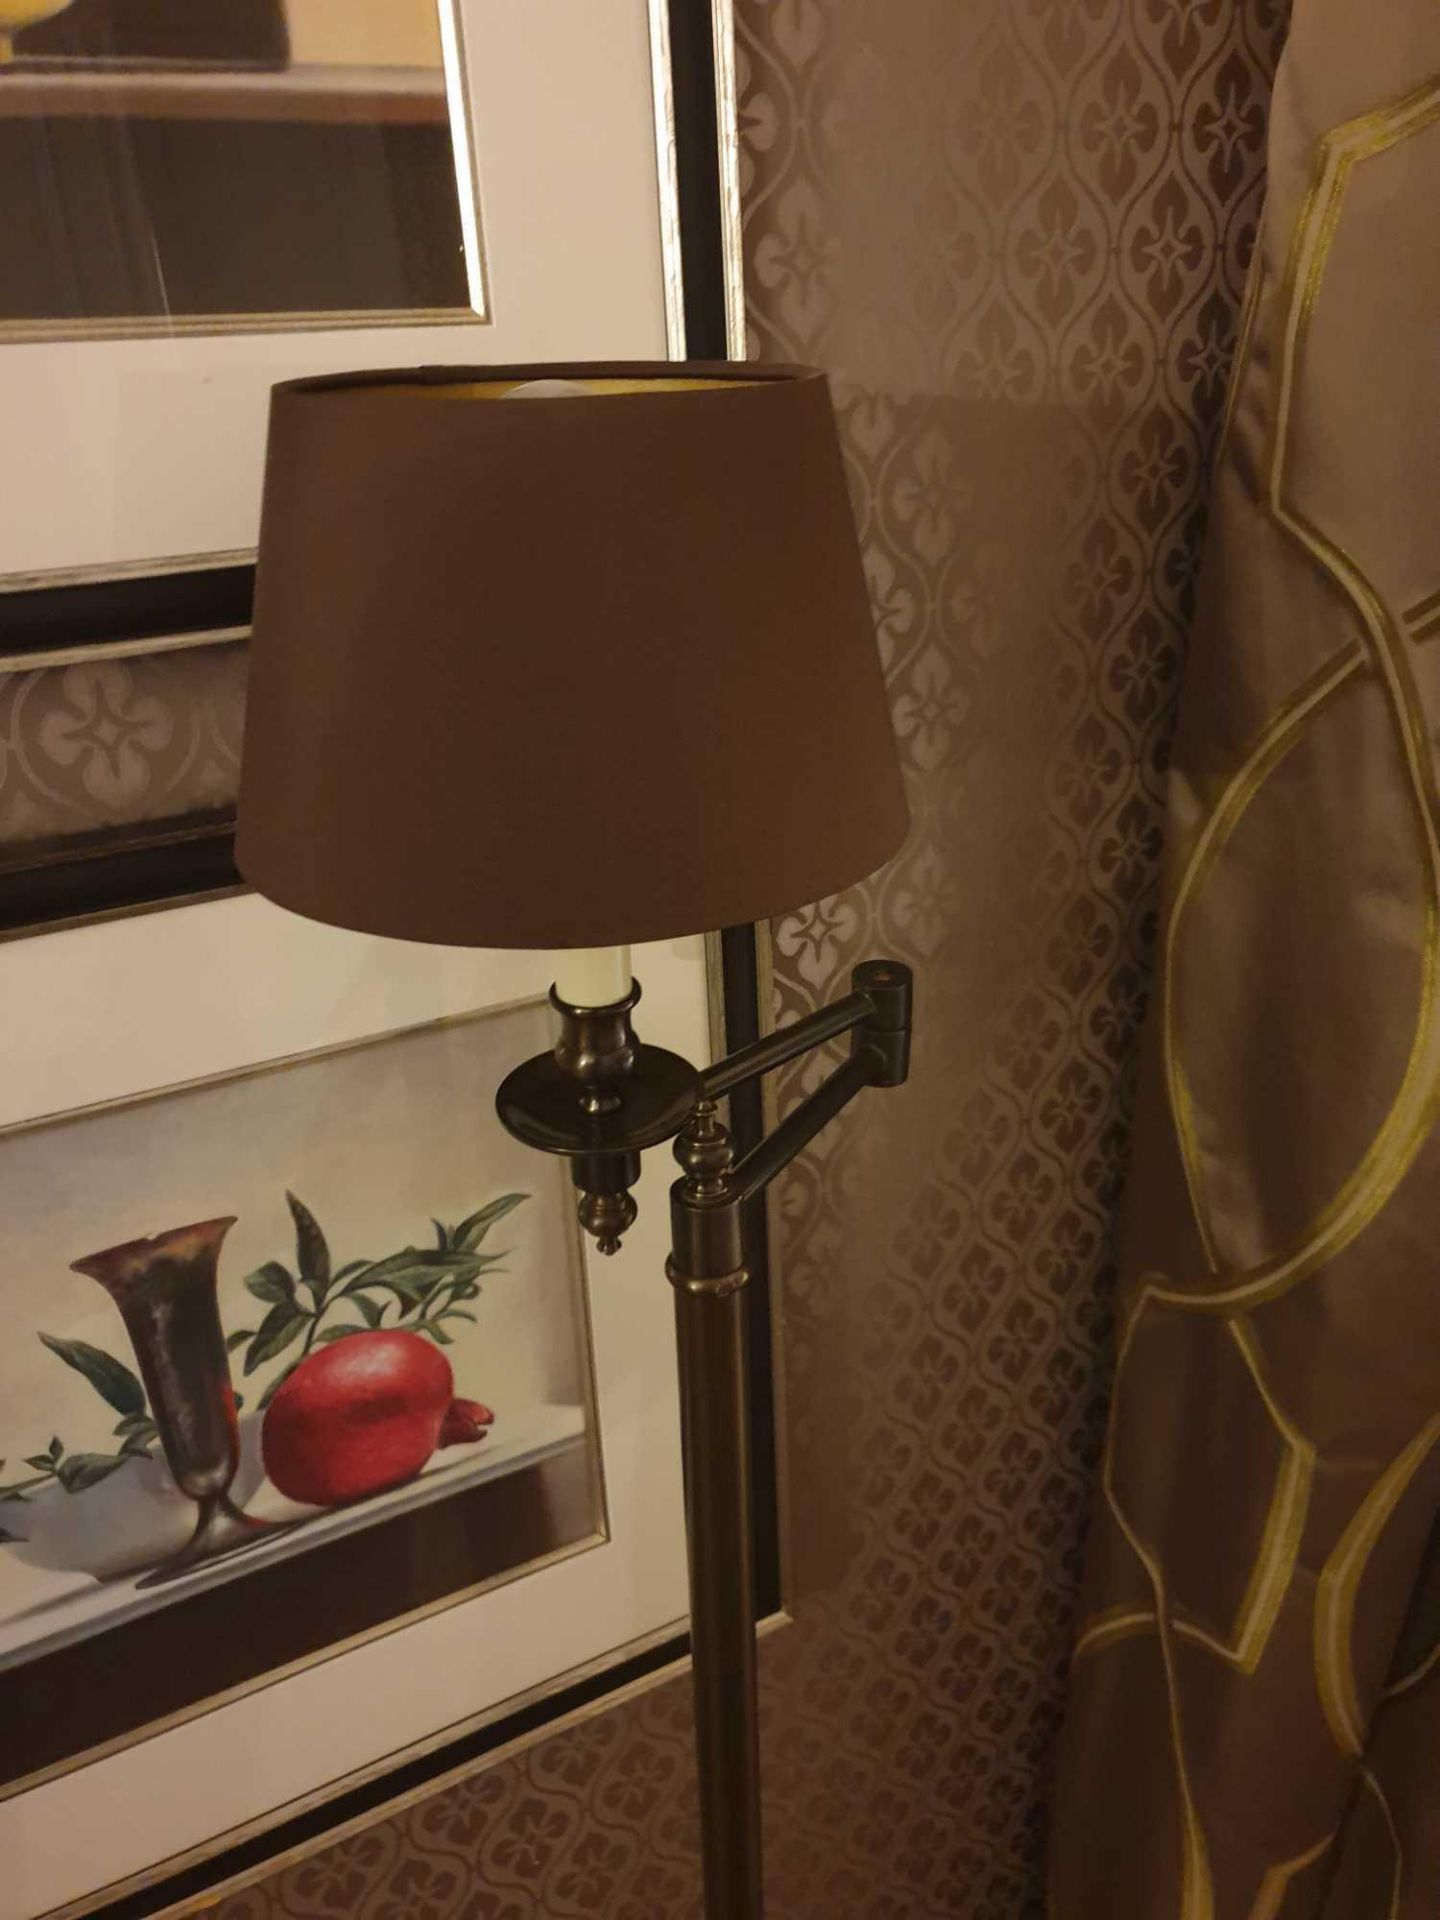 Library Floor Lamp Finished In English Bronze Swing Arm Function With Shade 156cm (Room 341) - Image 2 of 2